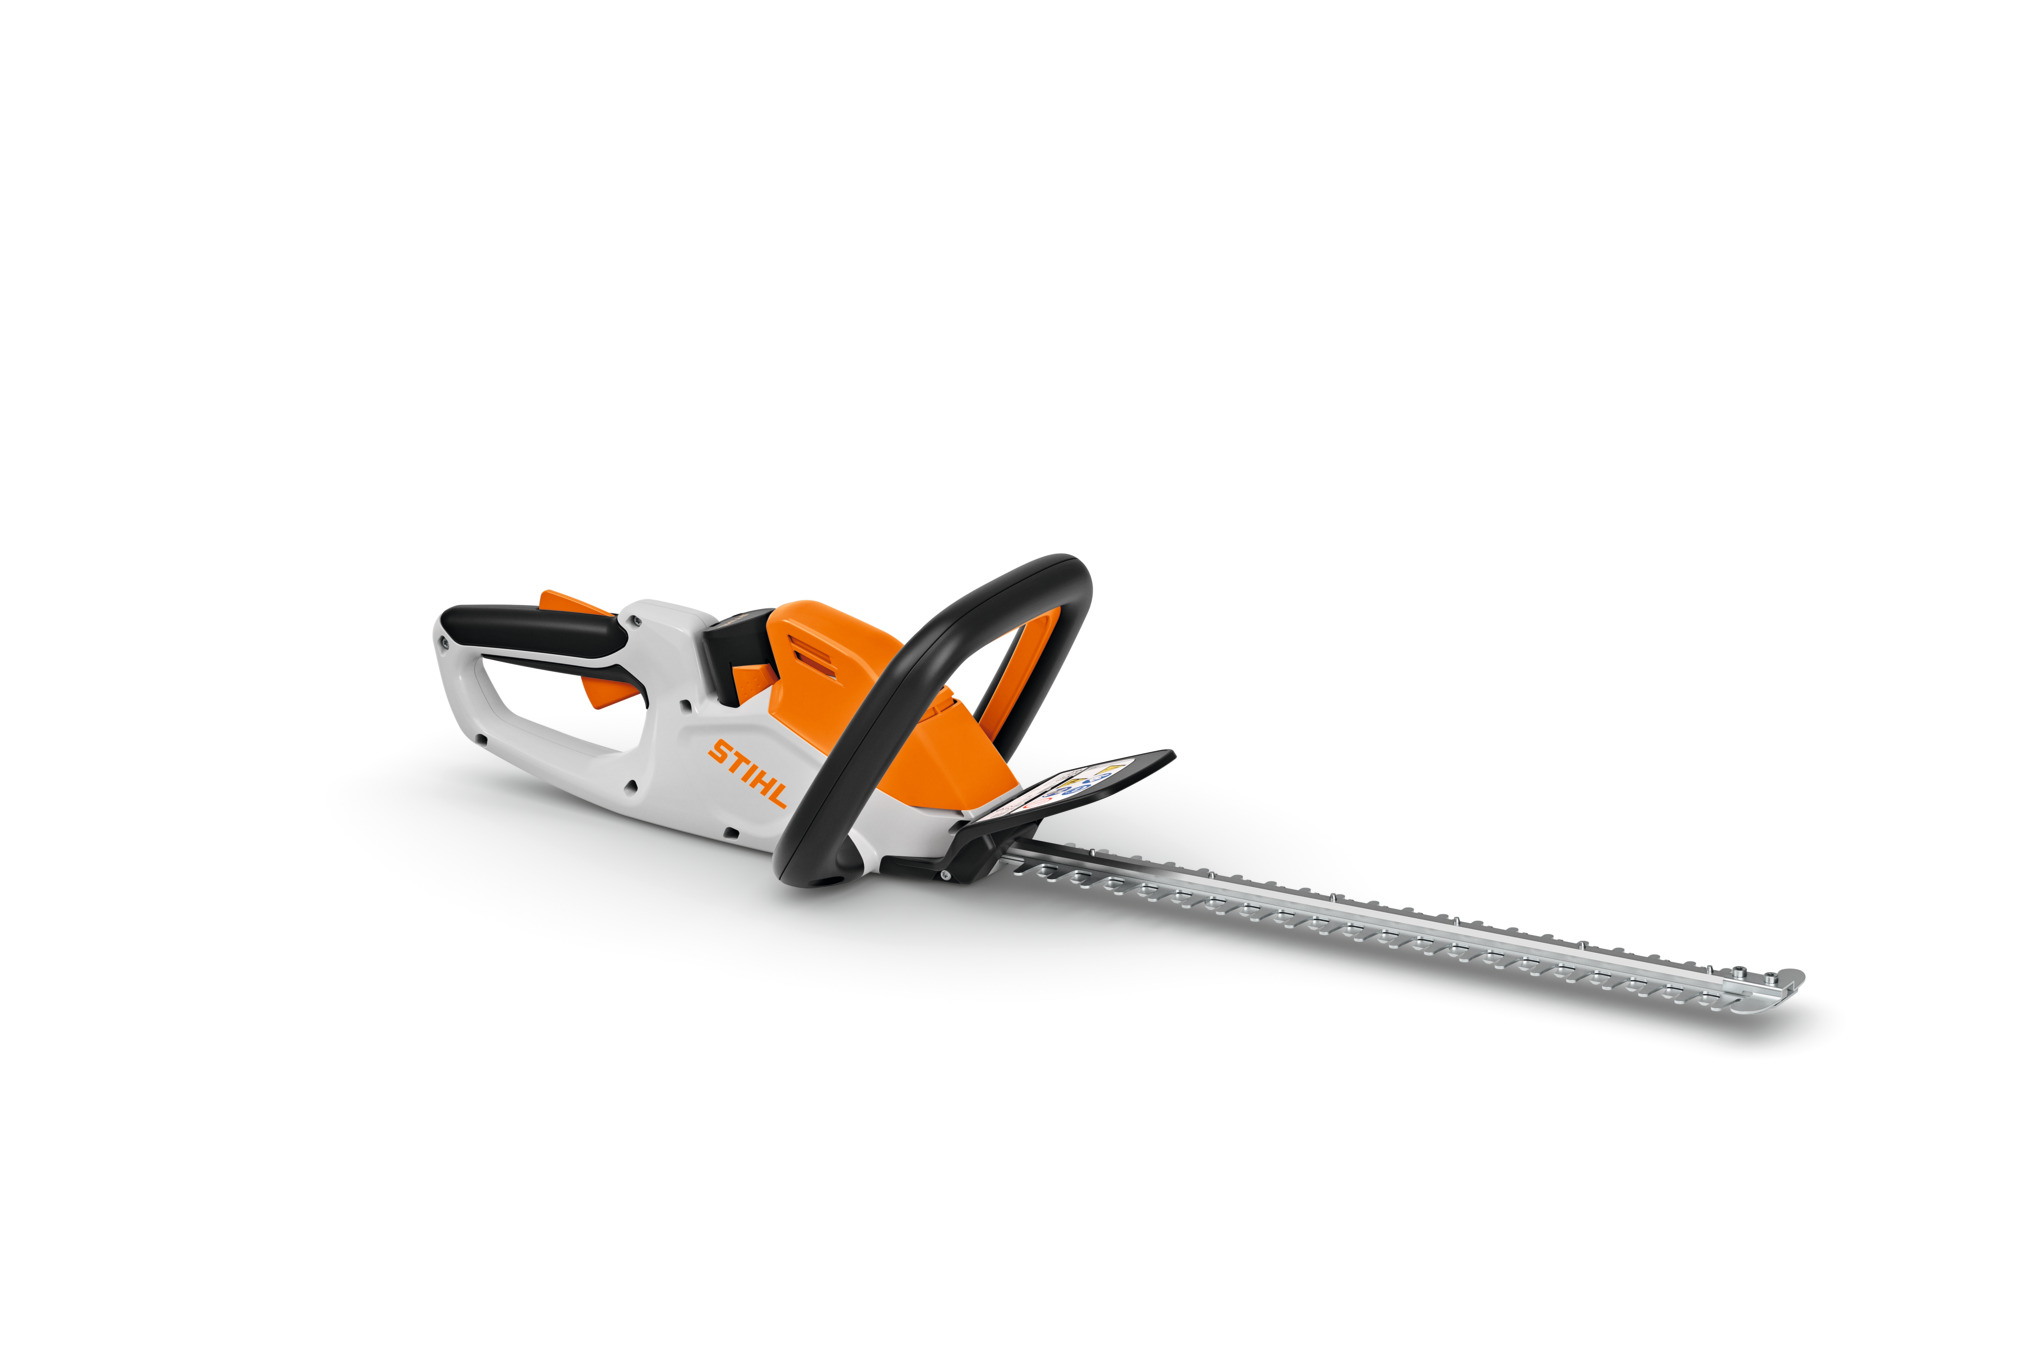 HSA 30 Cordless Hedge Trimmer